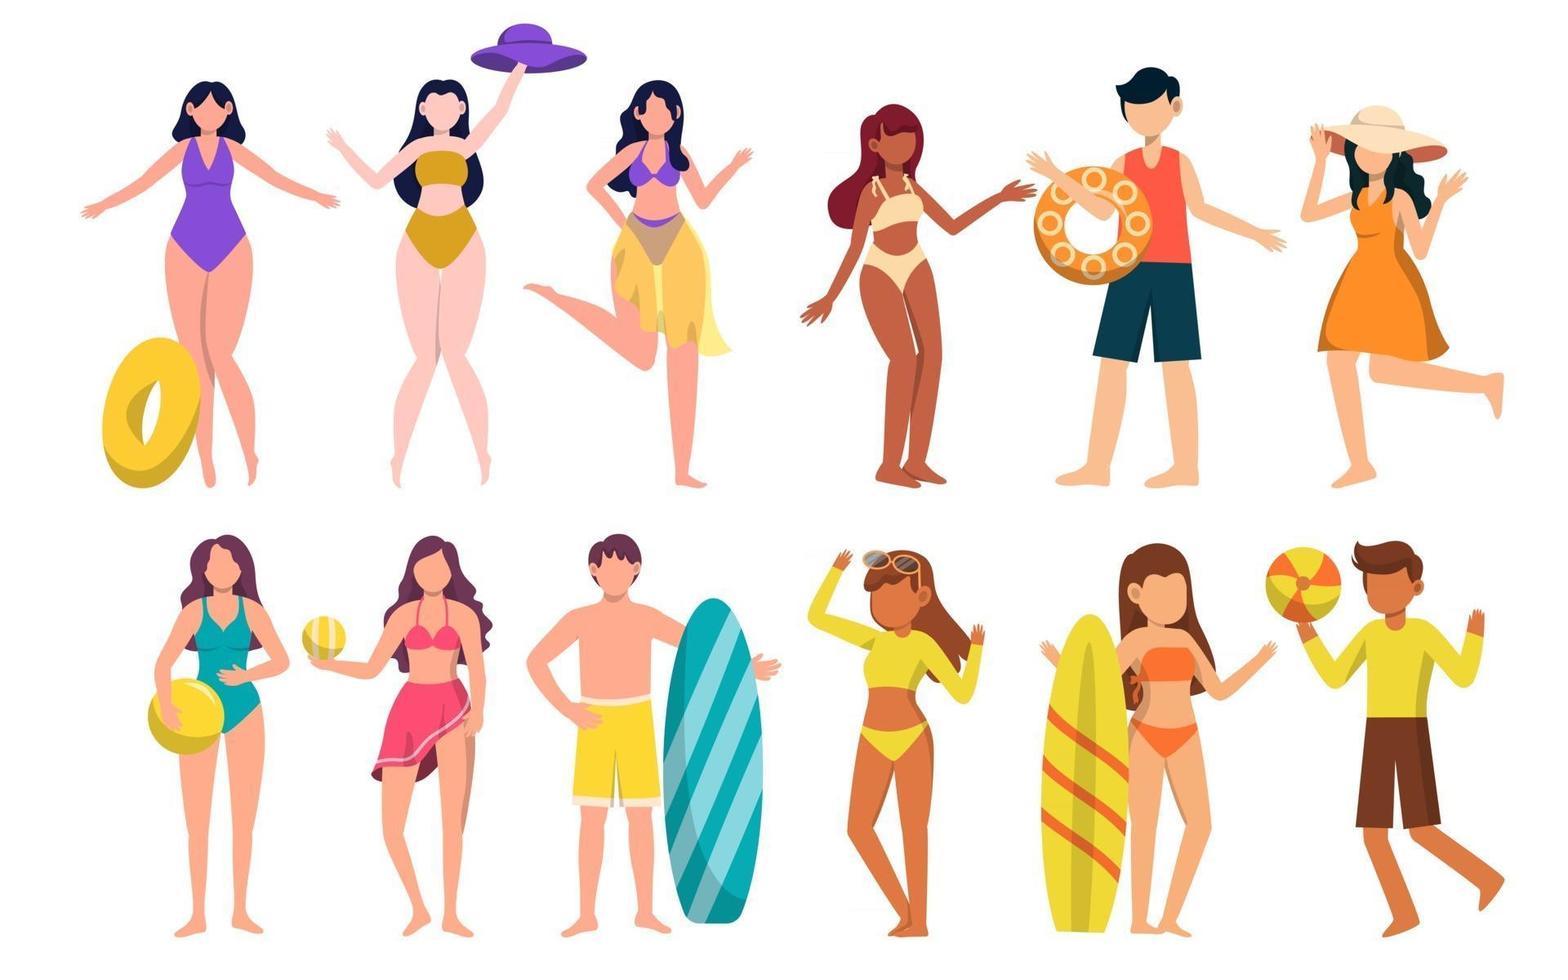 Bundle of woman character 4 sets, 12 poses of female in swimming suit with gear vector